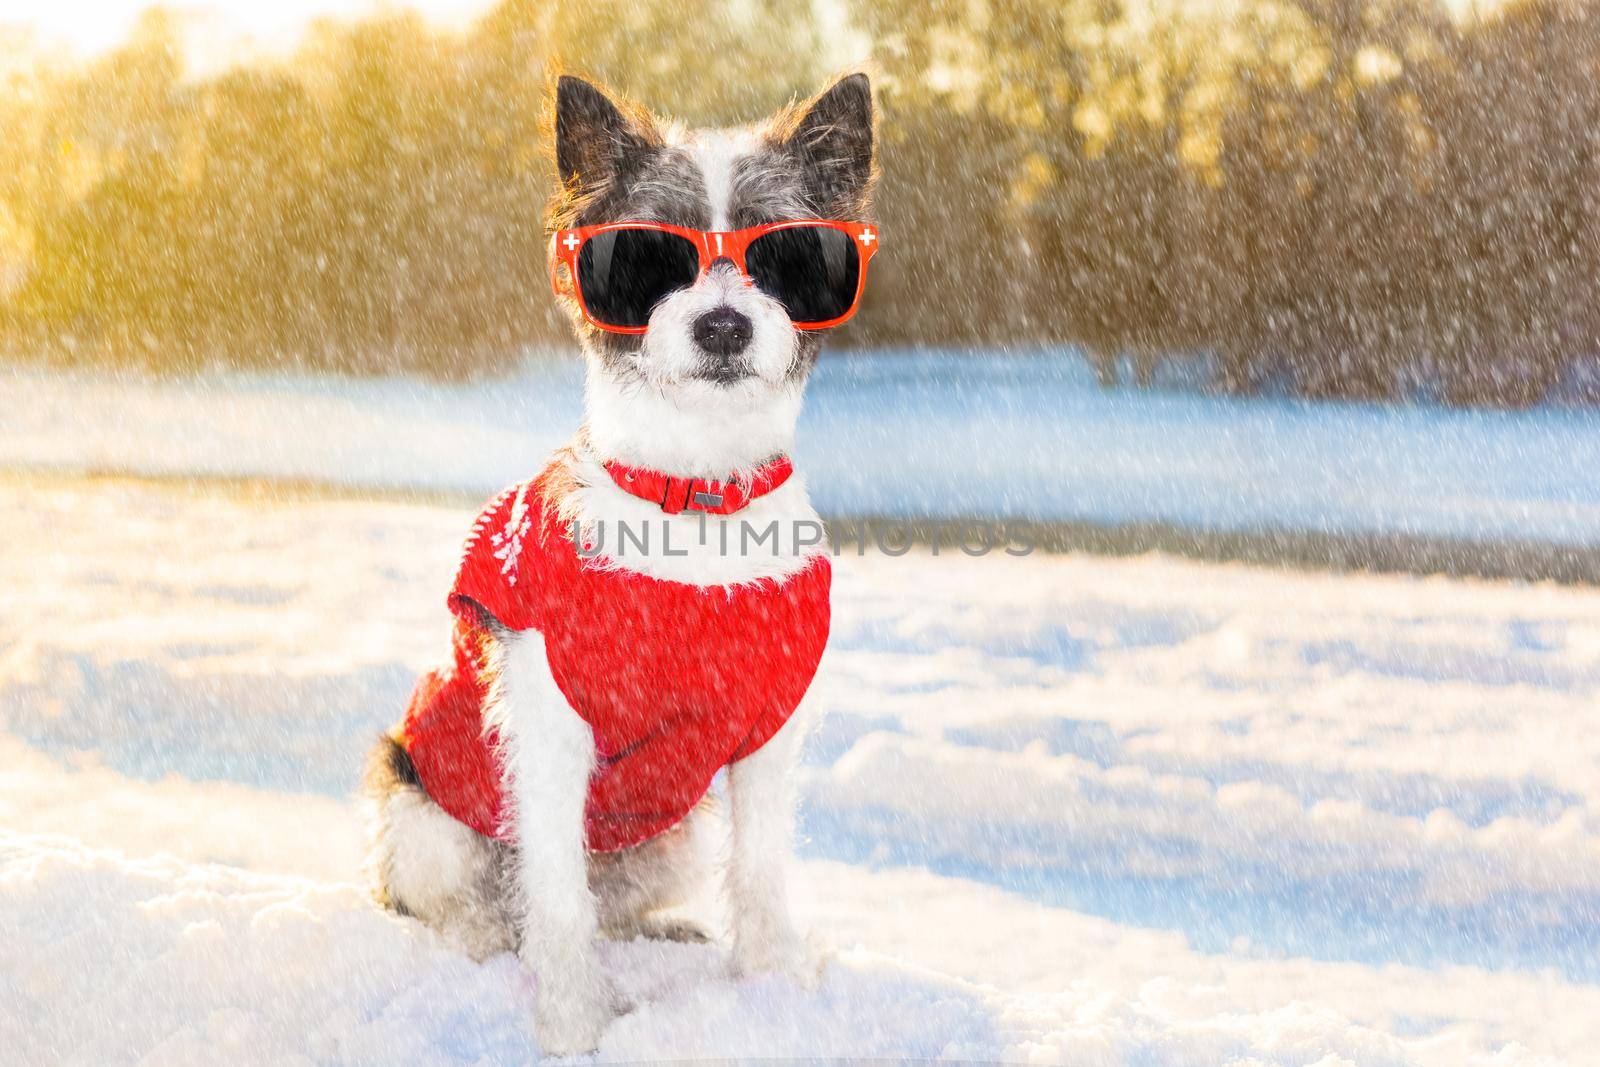 cool funny freezing icy dog in snow with sunglasses and scarf, sitting and waiting to go for a walk with owner